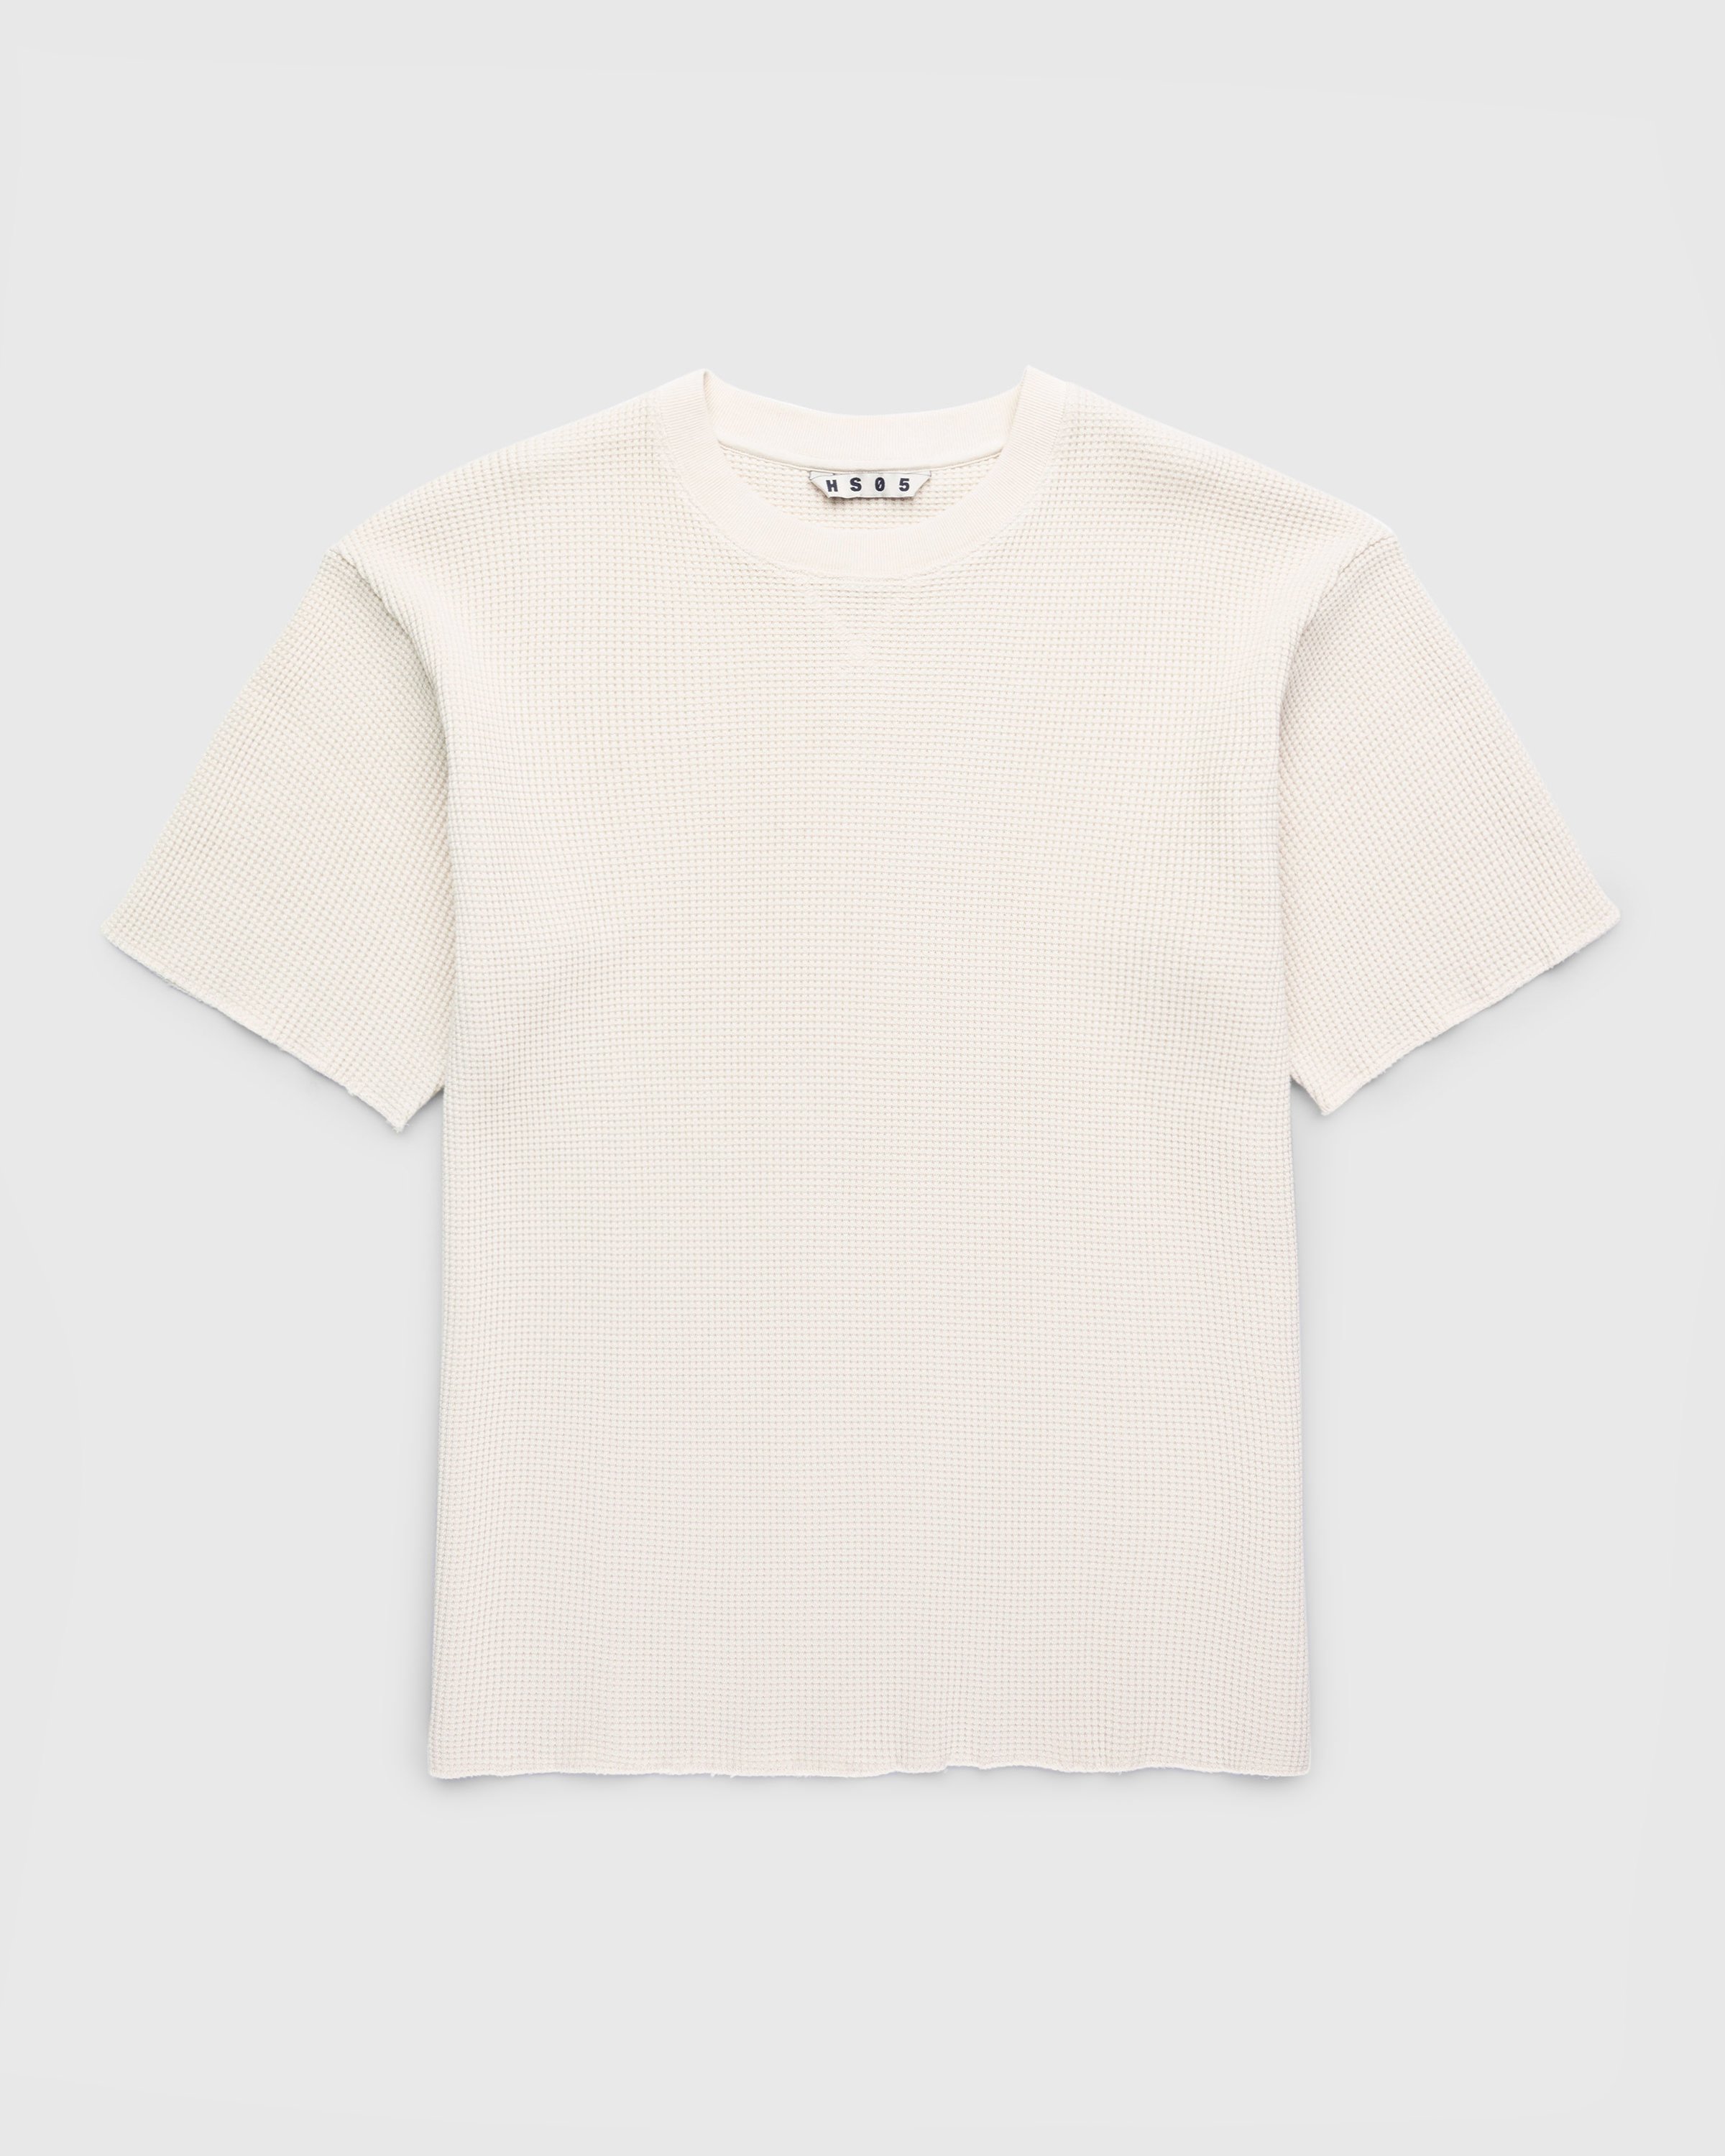 Highsnobiety HS05 - Thermal Short Sleeve Natural - Clothing - Beige - Image 1